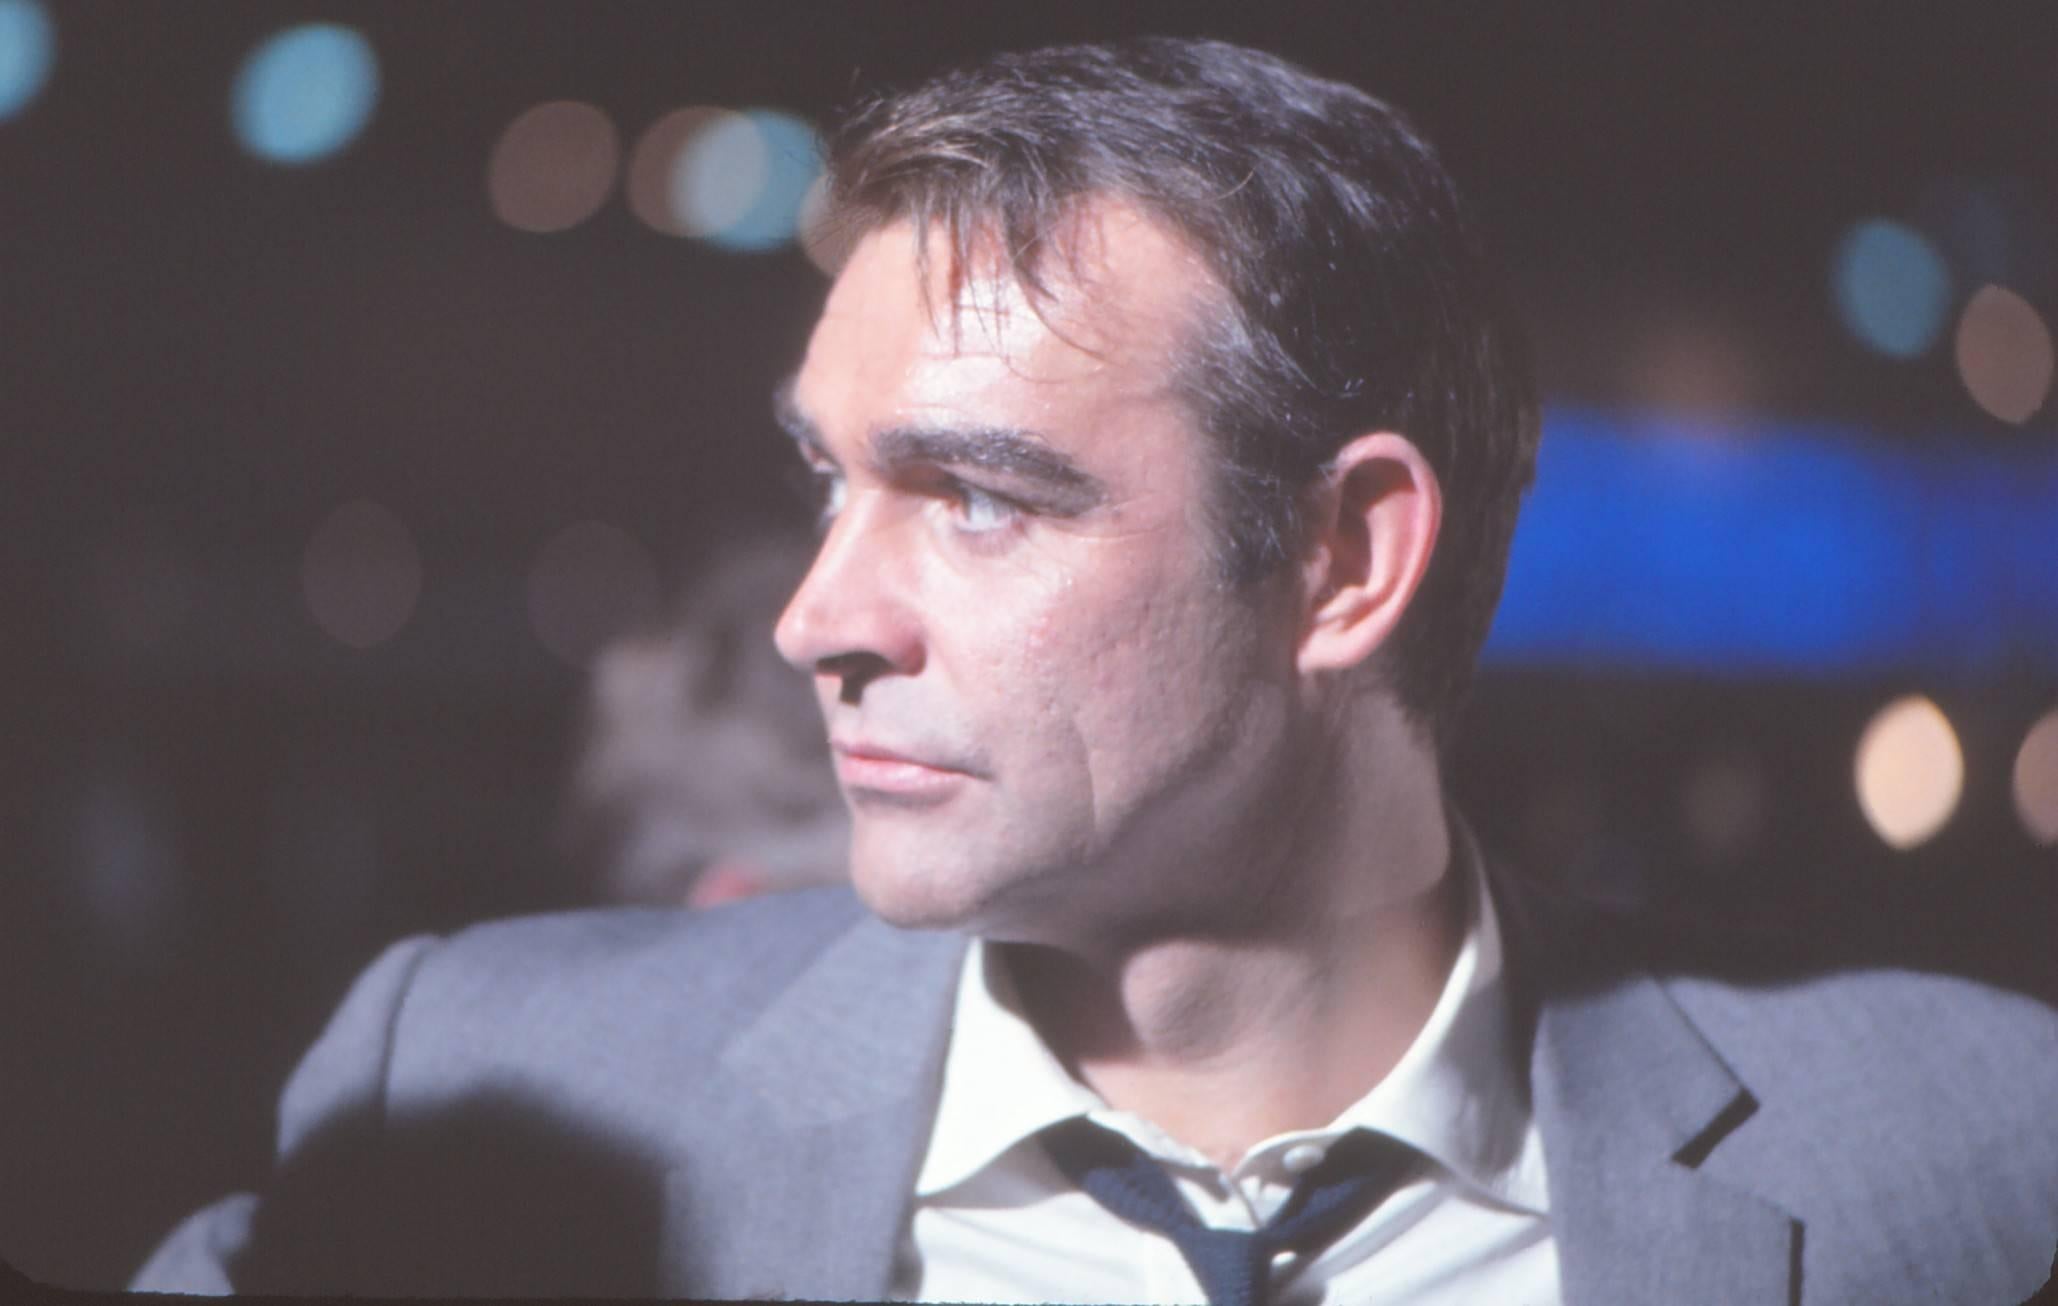 Unknown Portrait Photograph - Sean Connery as James Bond in "You Only Live Twice" Fine Art Print